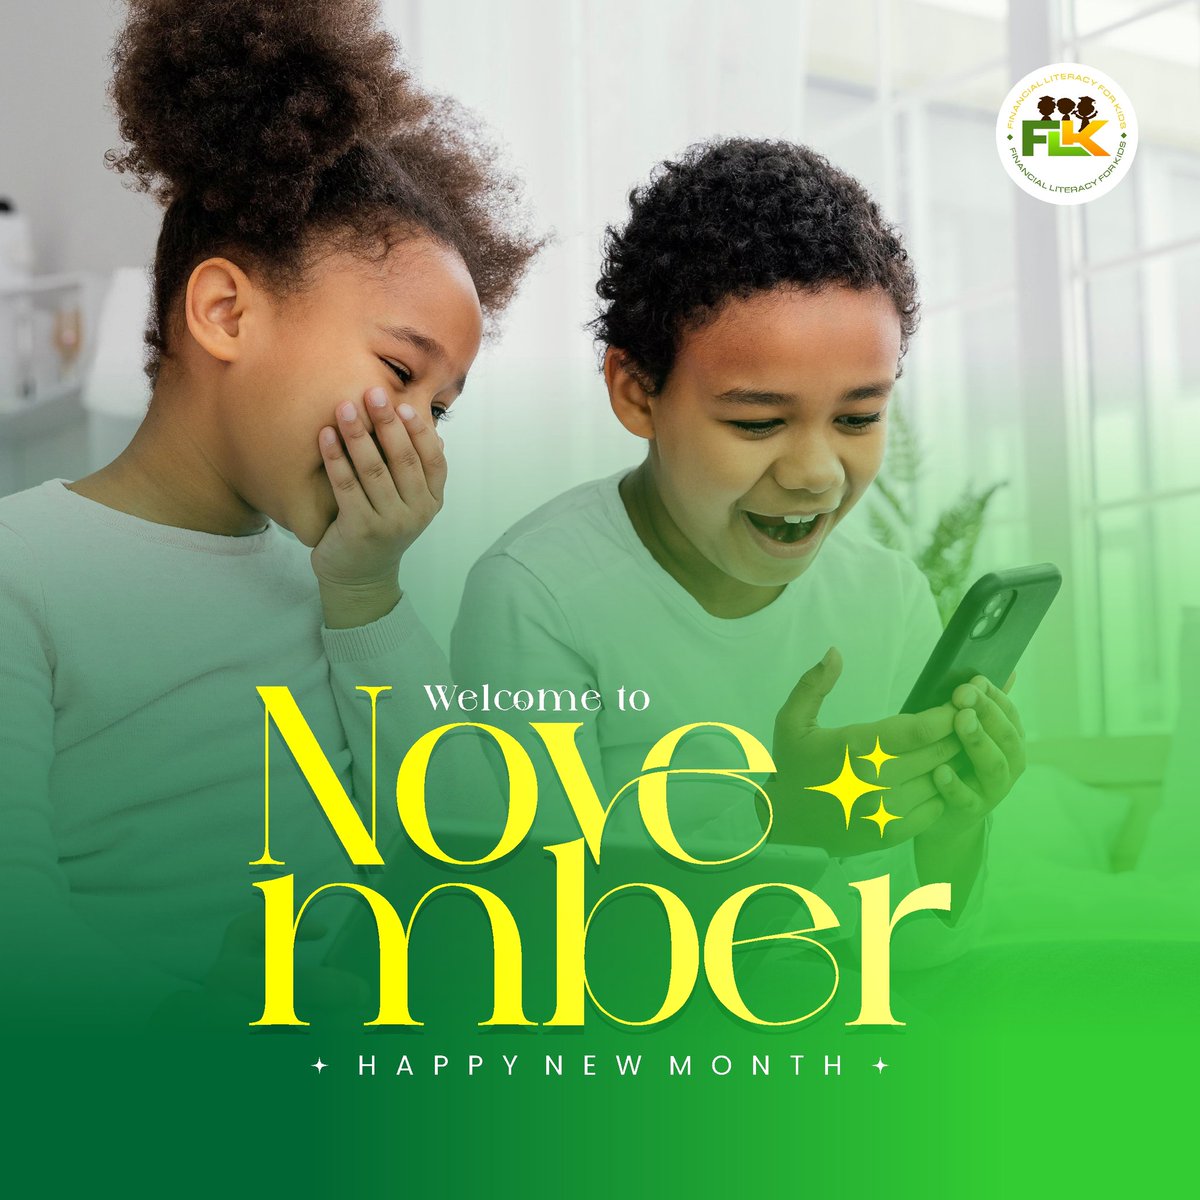 We hope you are as excited as us for the new month...

Welcome to November...

#financialliteracyforkids #financialliteracyforkidsinAbuja #childfinancecoach #teensfinancecoach #finlit4kids #finlit4teens #childrenintech